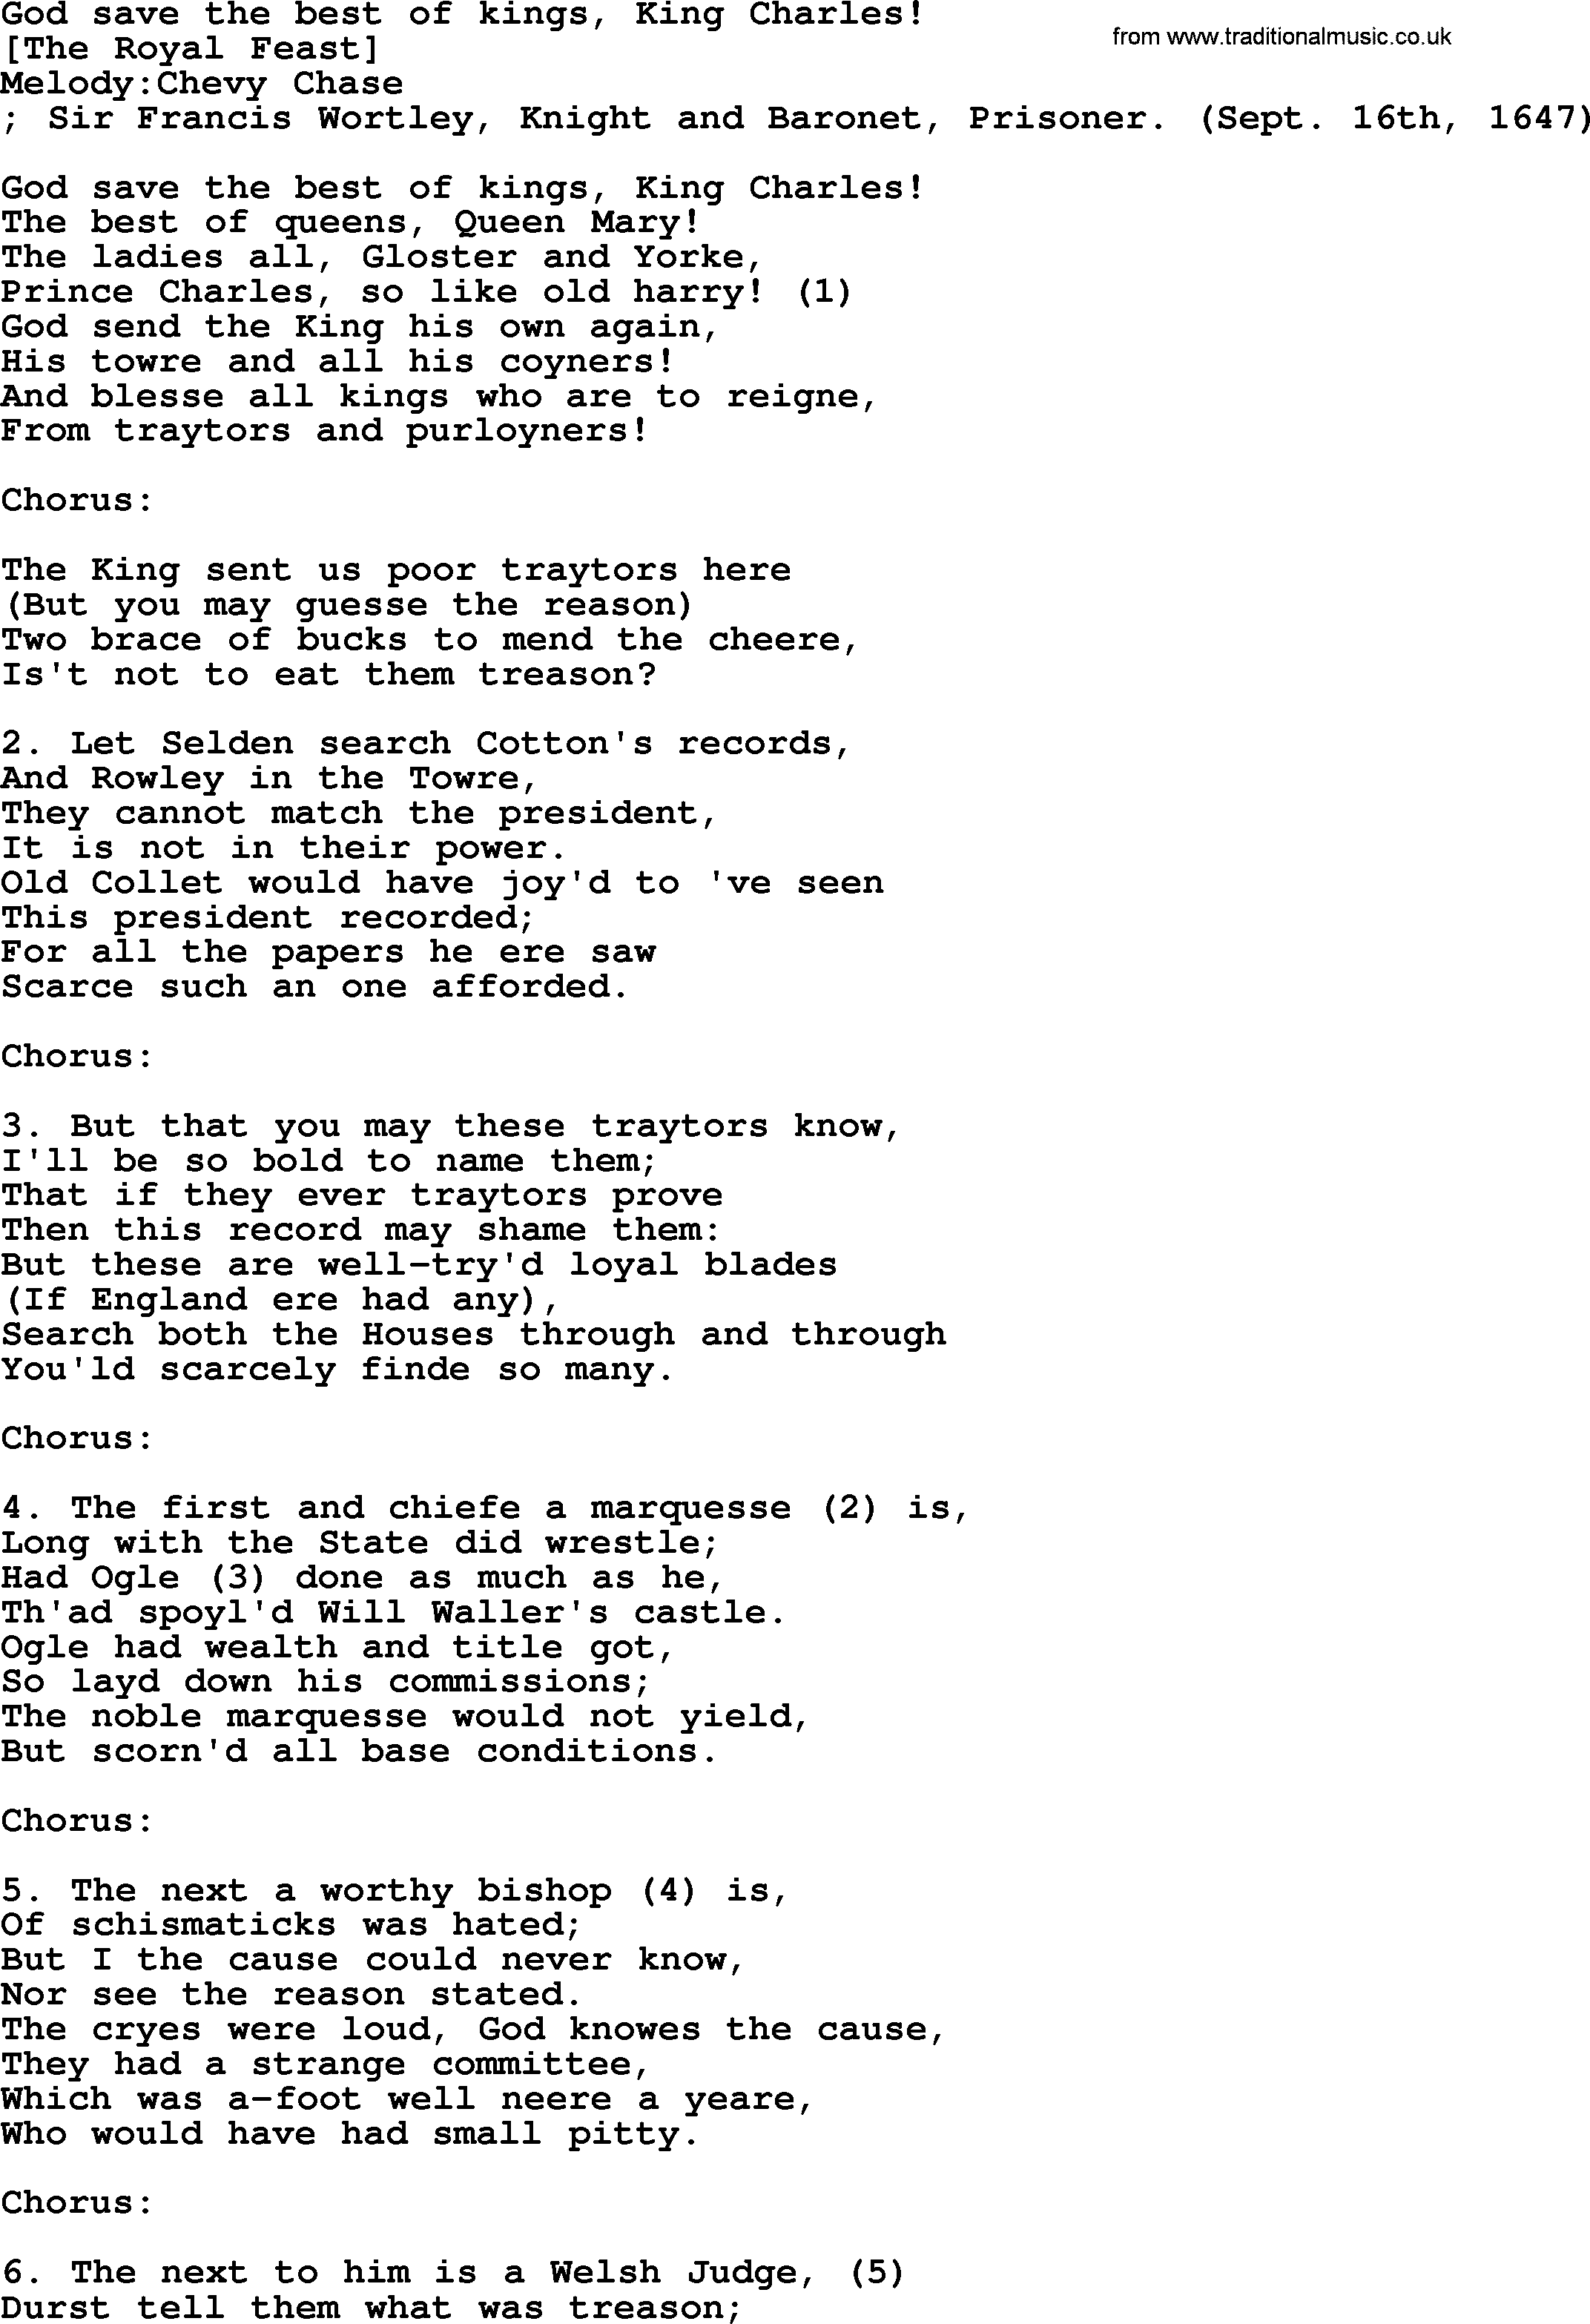 Old English Song Lyrics for God Save The Best Of Kings, King